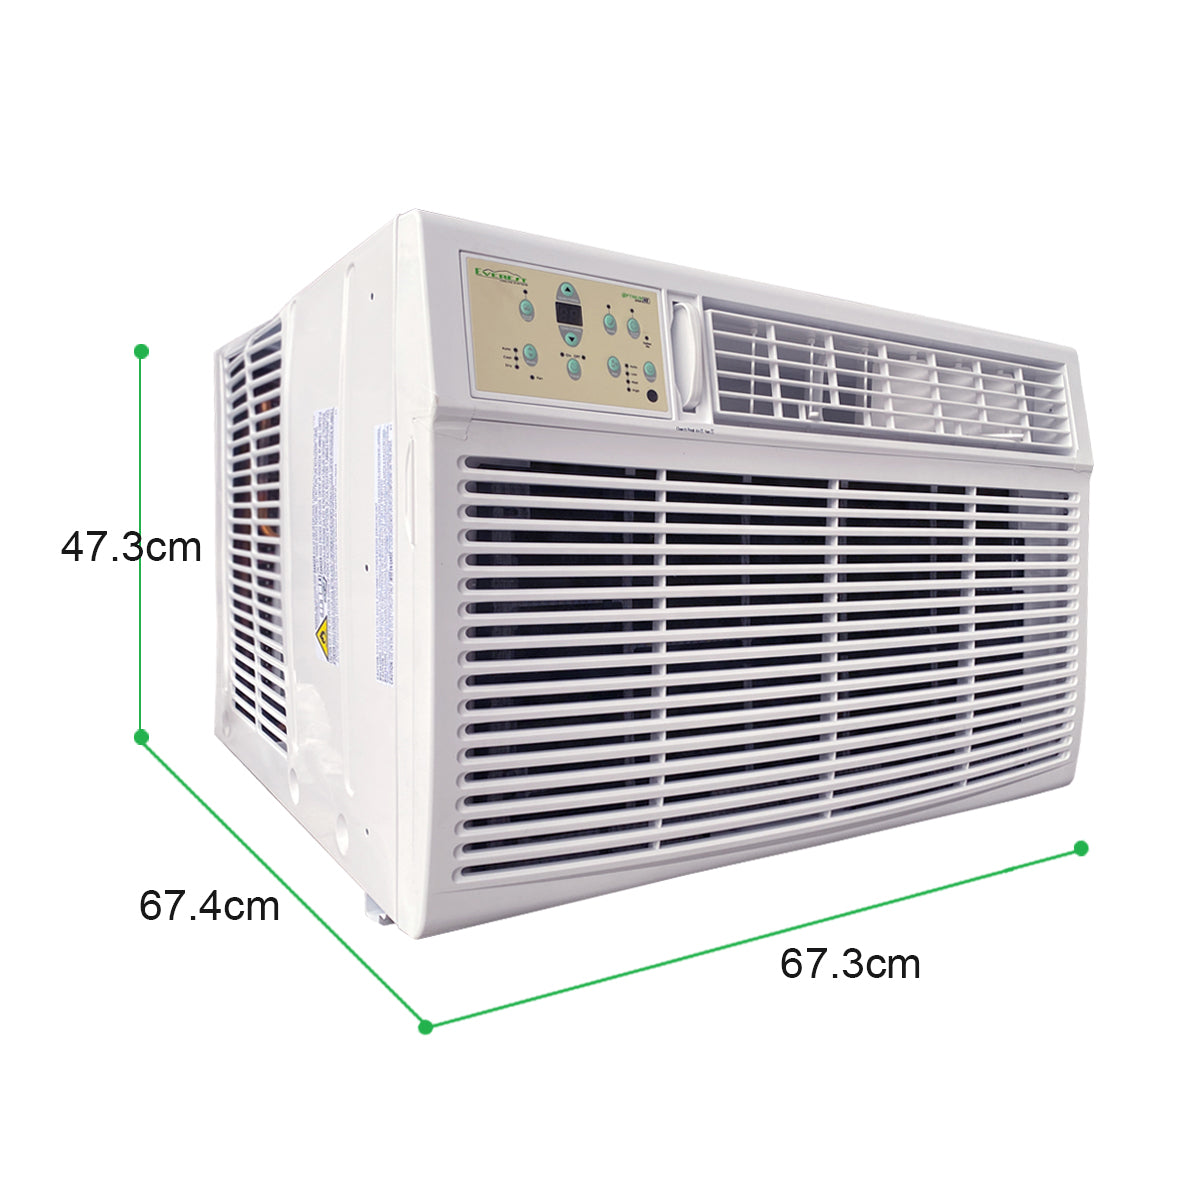 2.5 HP Window Type Aircon with Remote